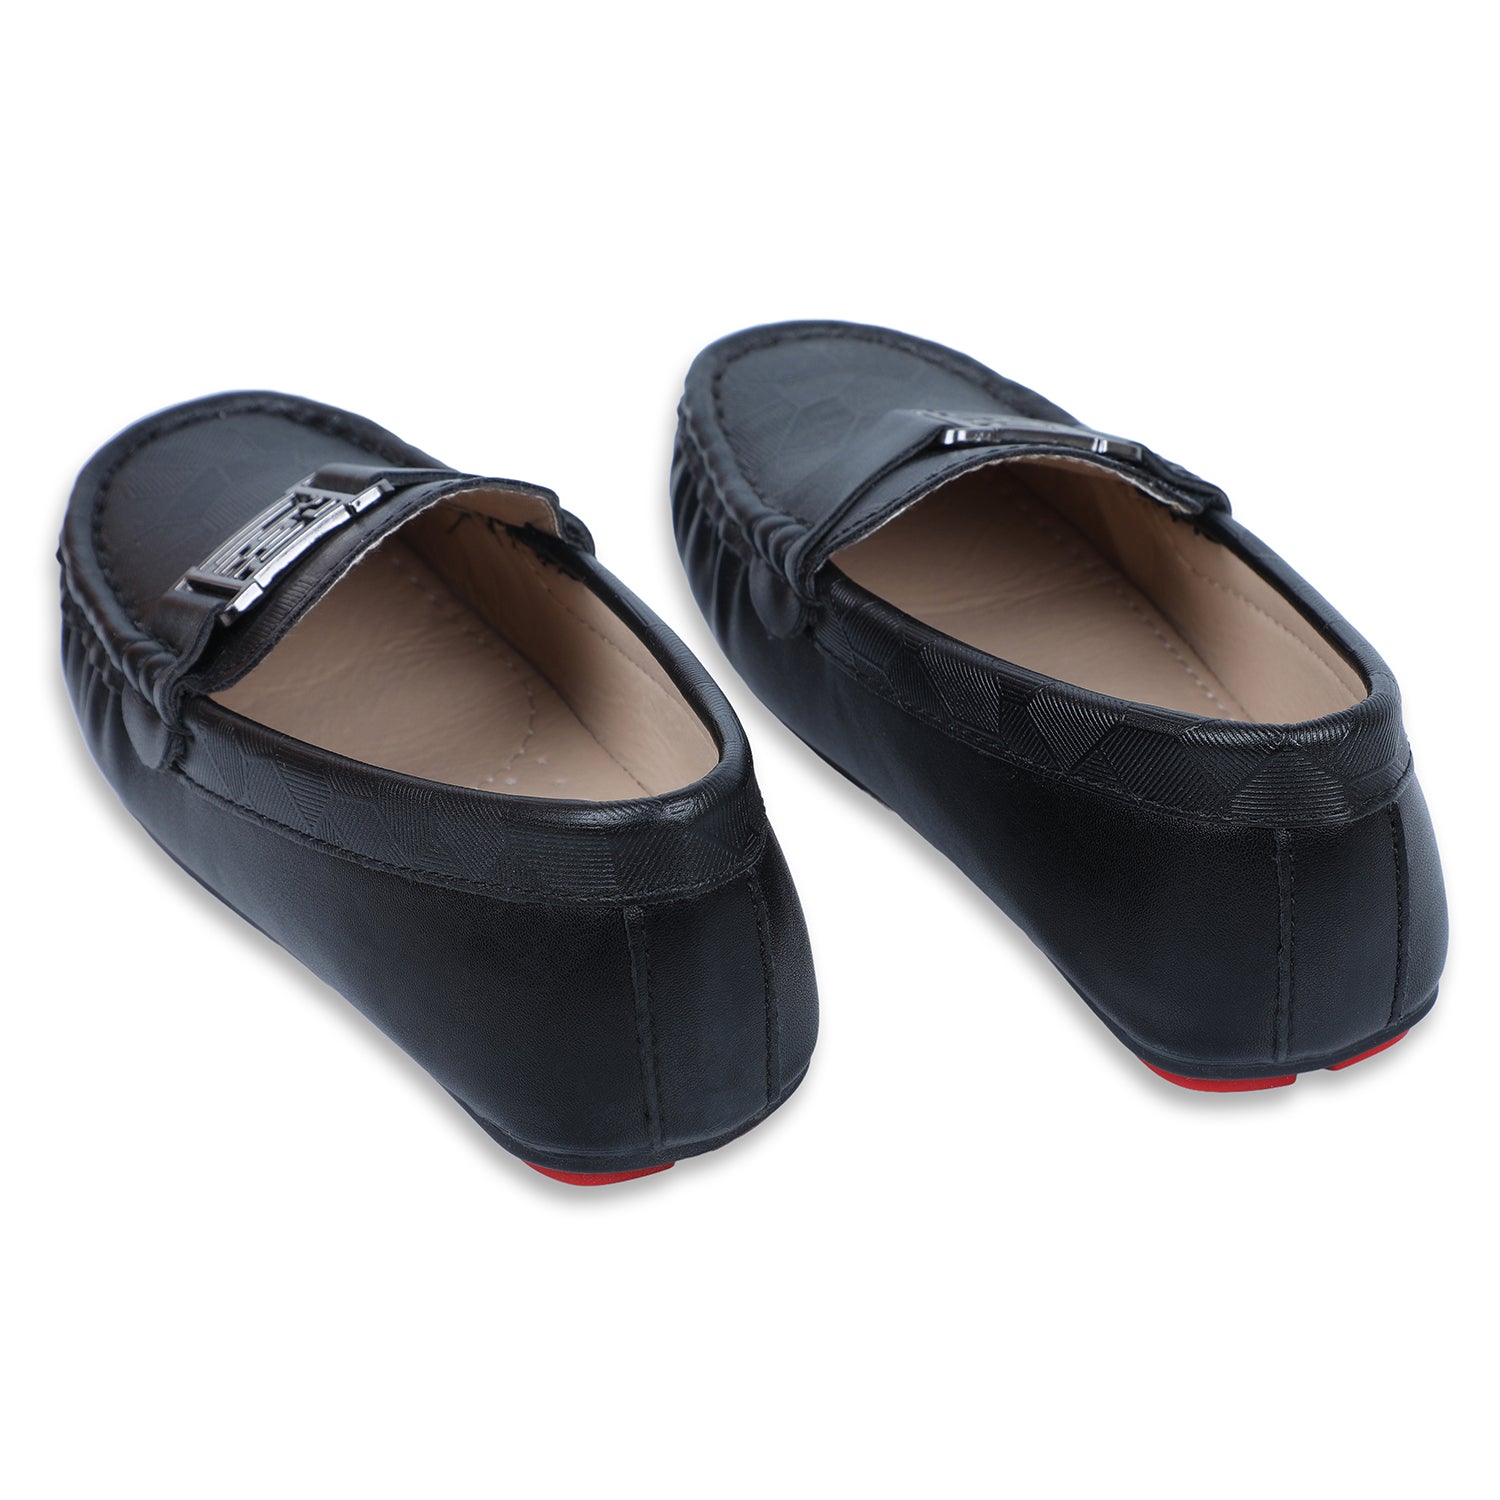 Baby Moo x Bash Kids Textured Leatherite Loafer Shoes - Black